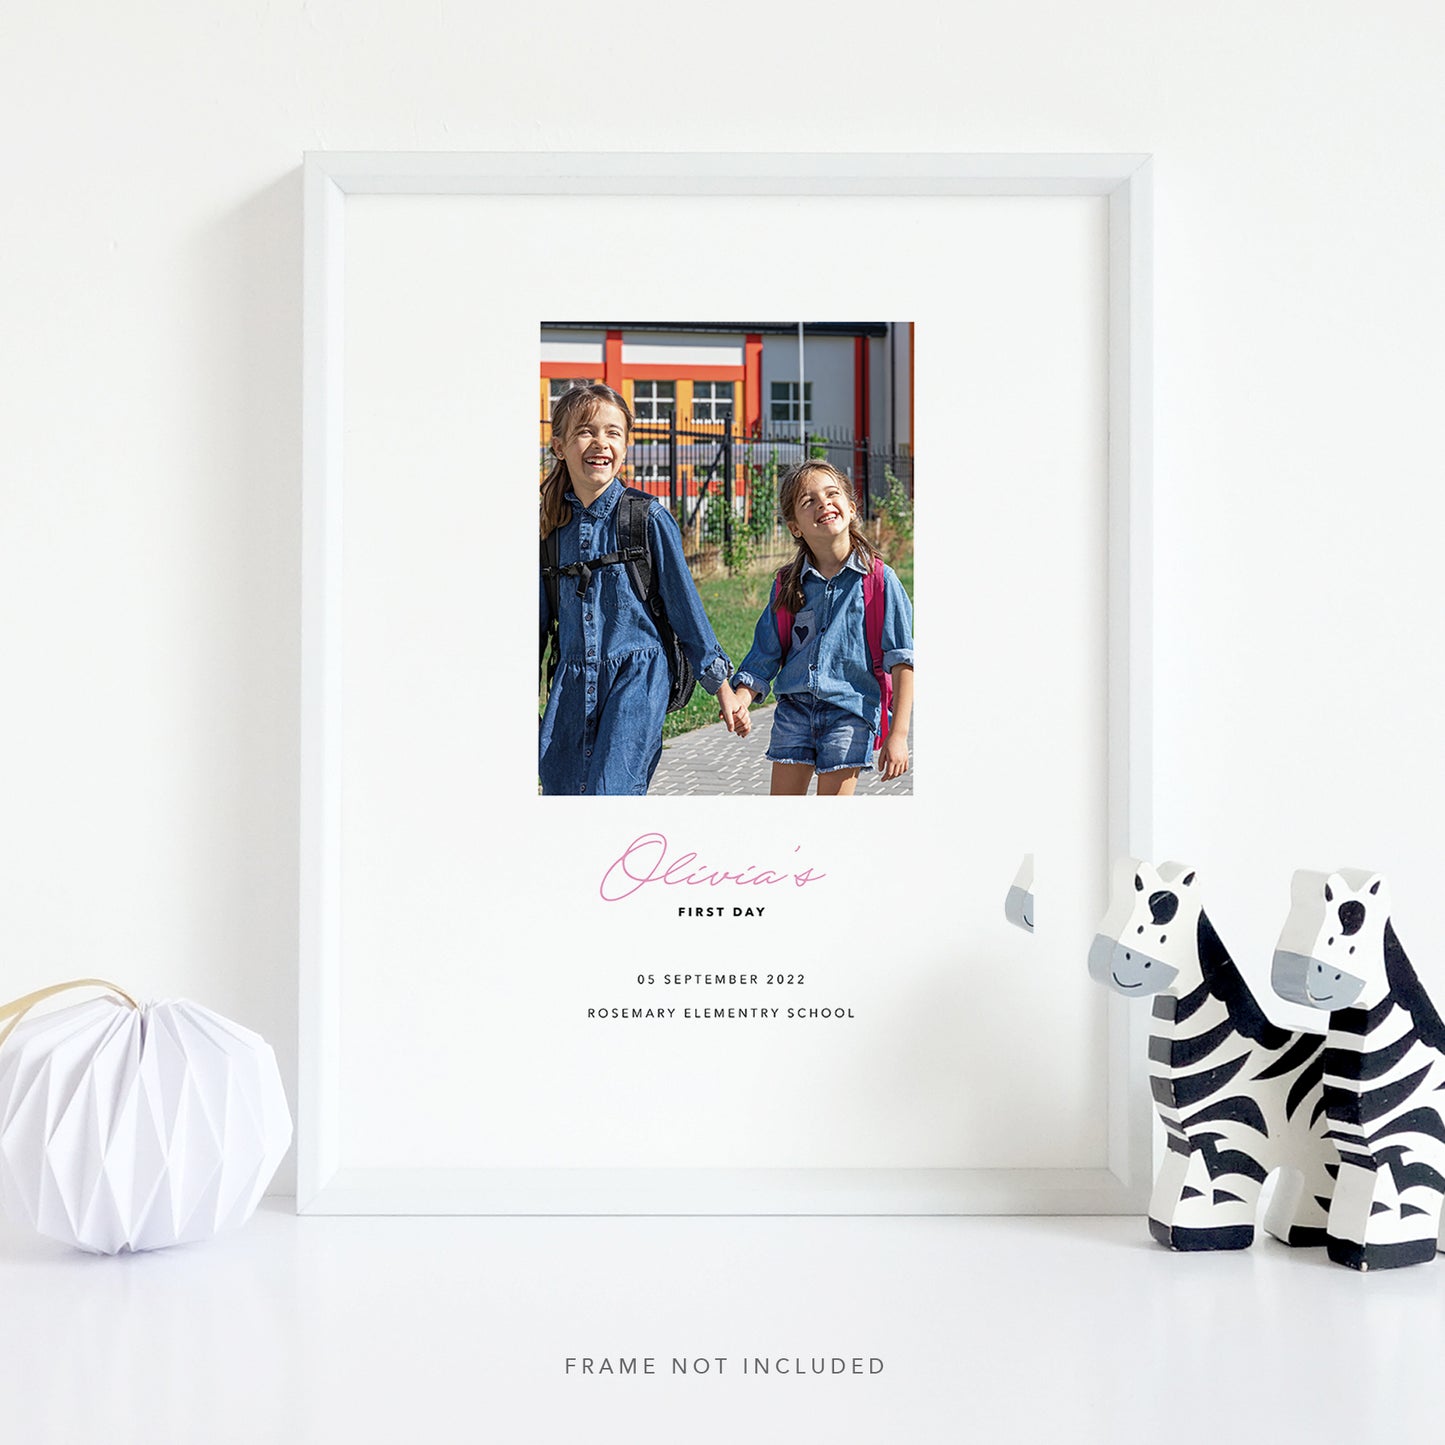 My first day at school photo print - Back to school